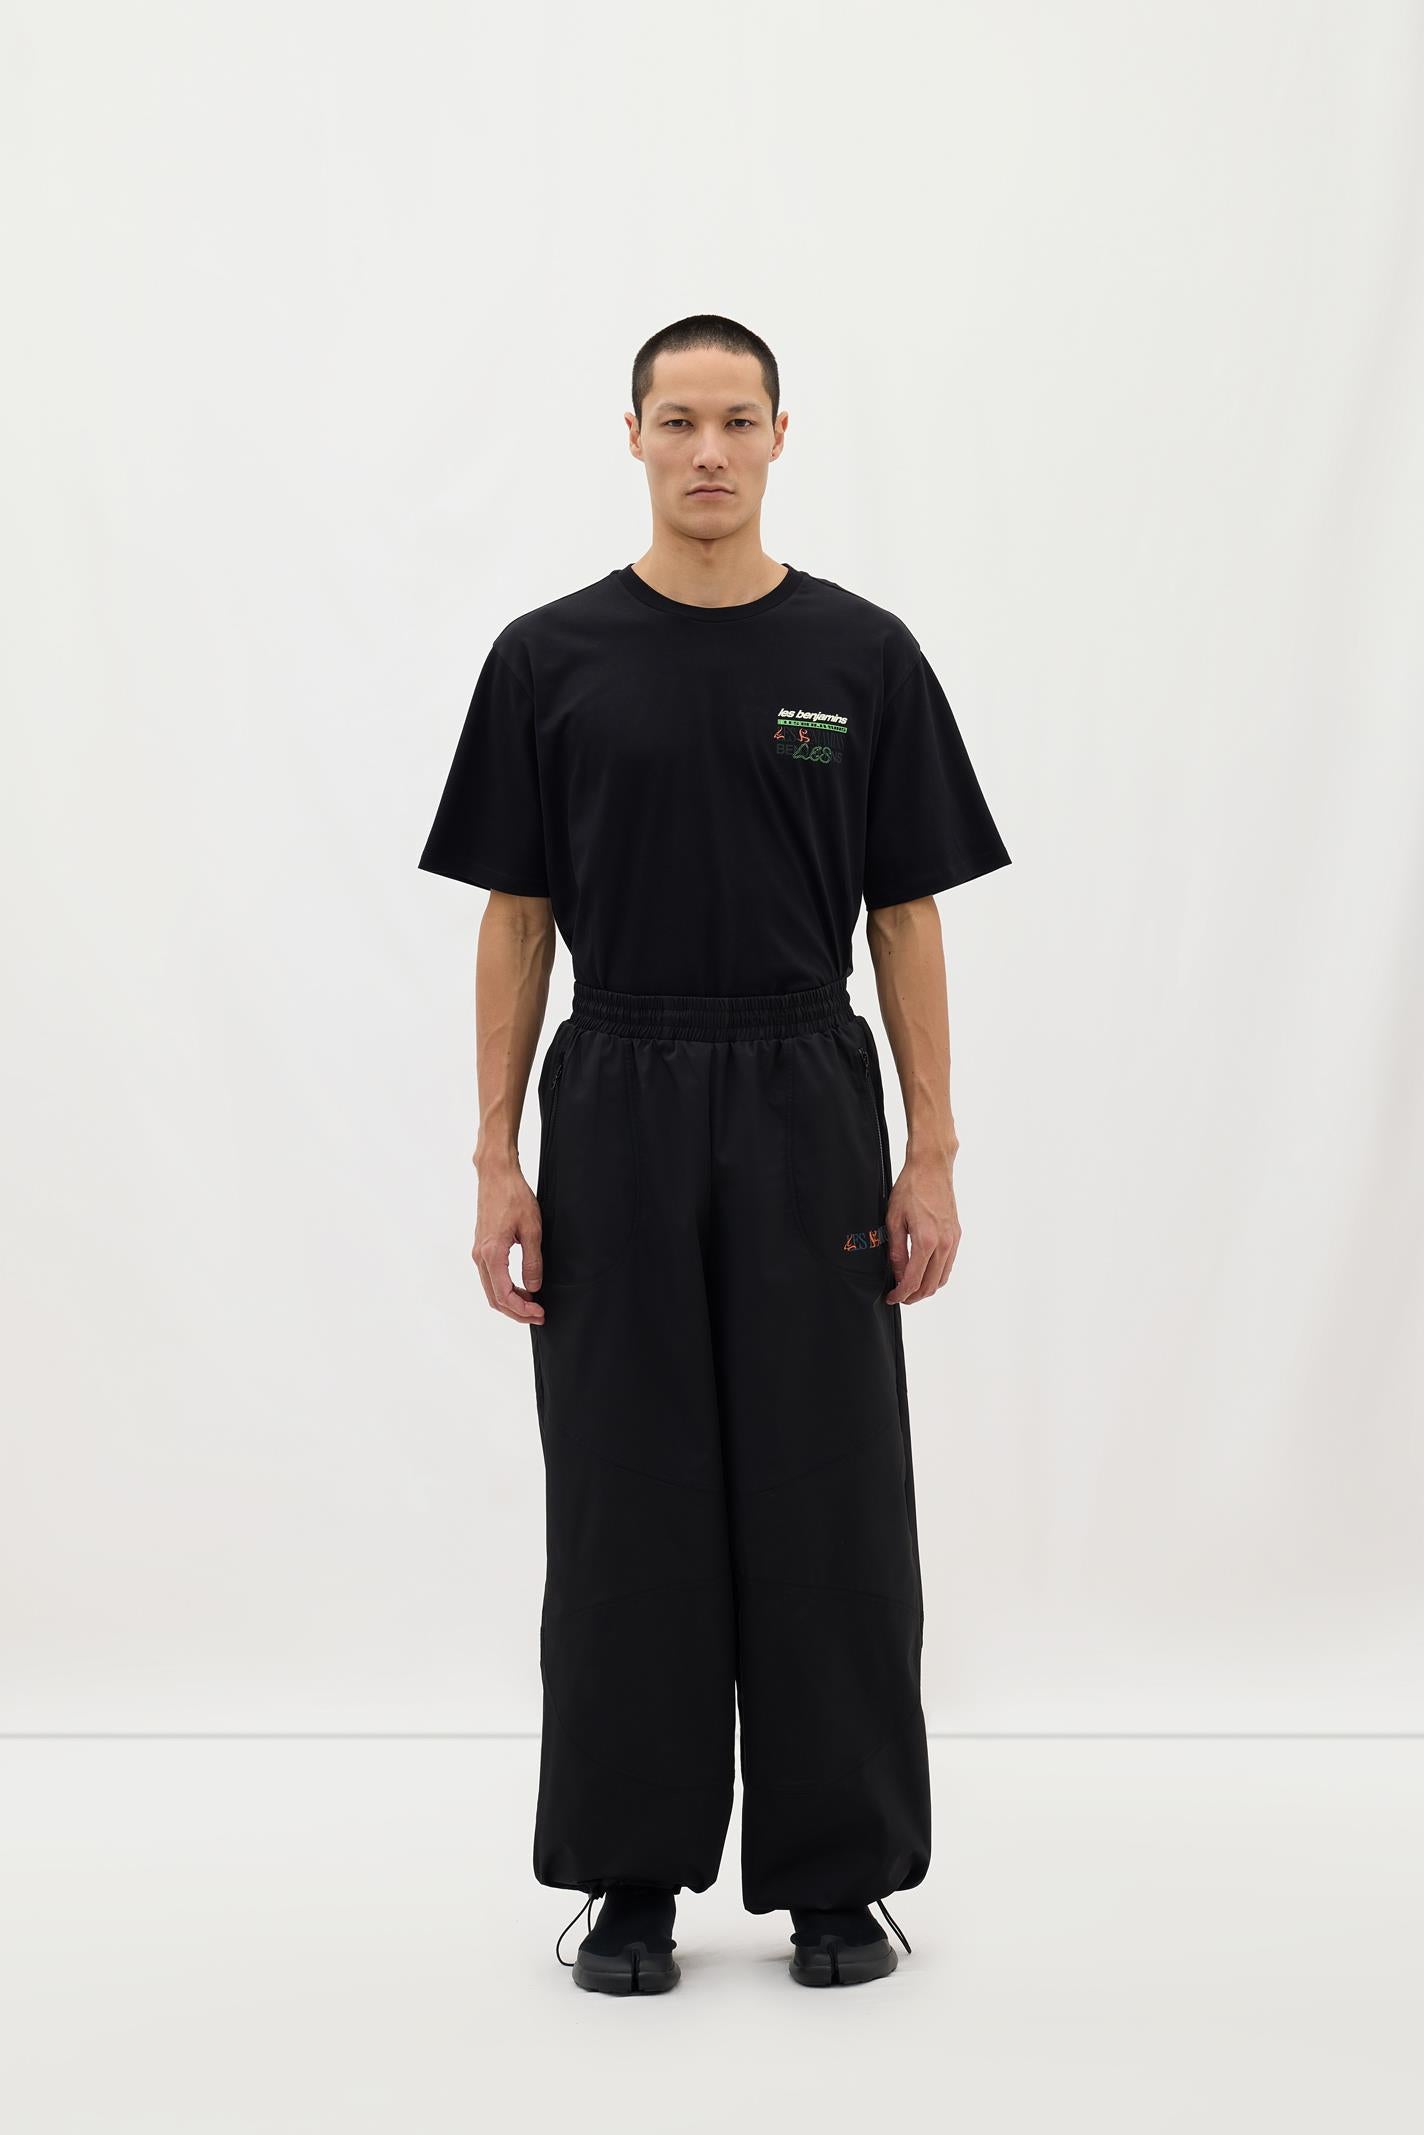 TRACKPANT 005